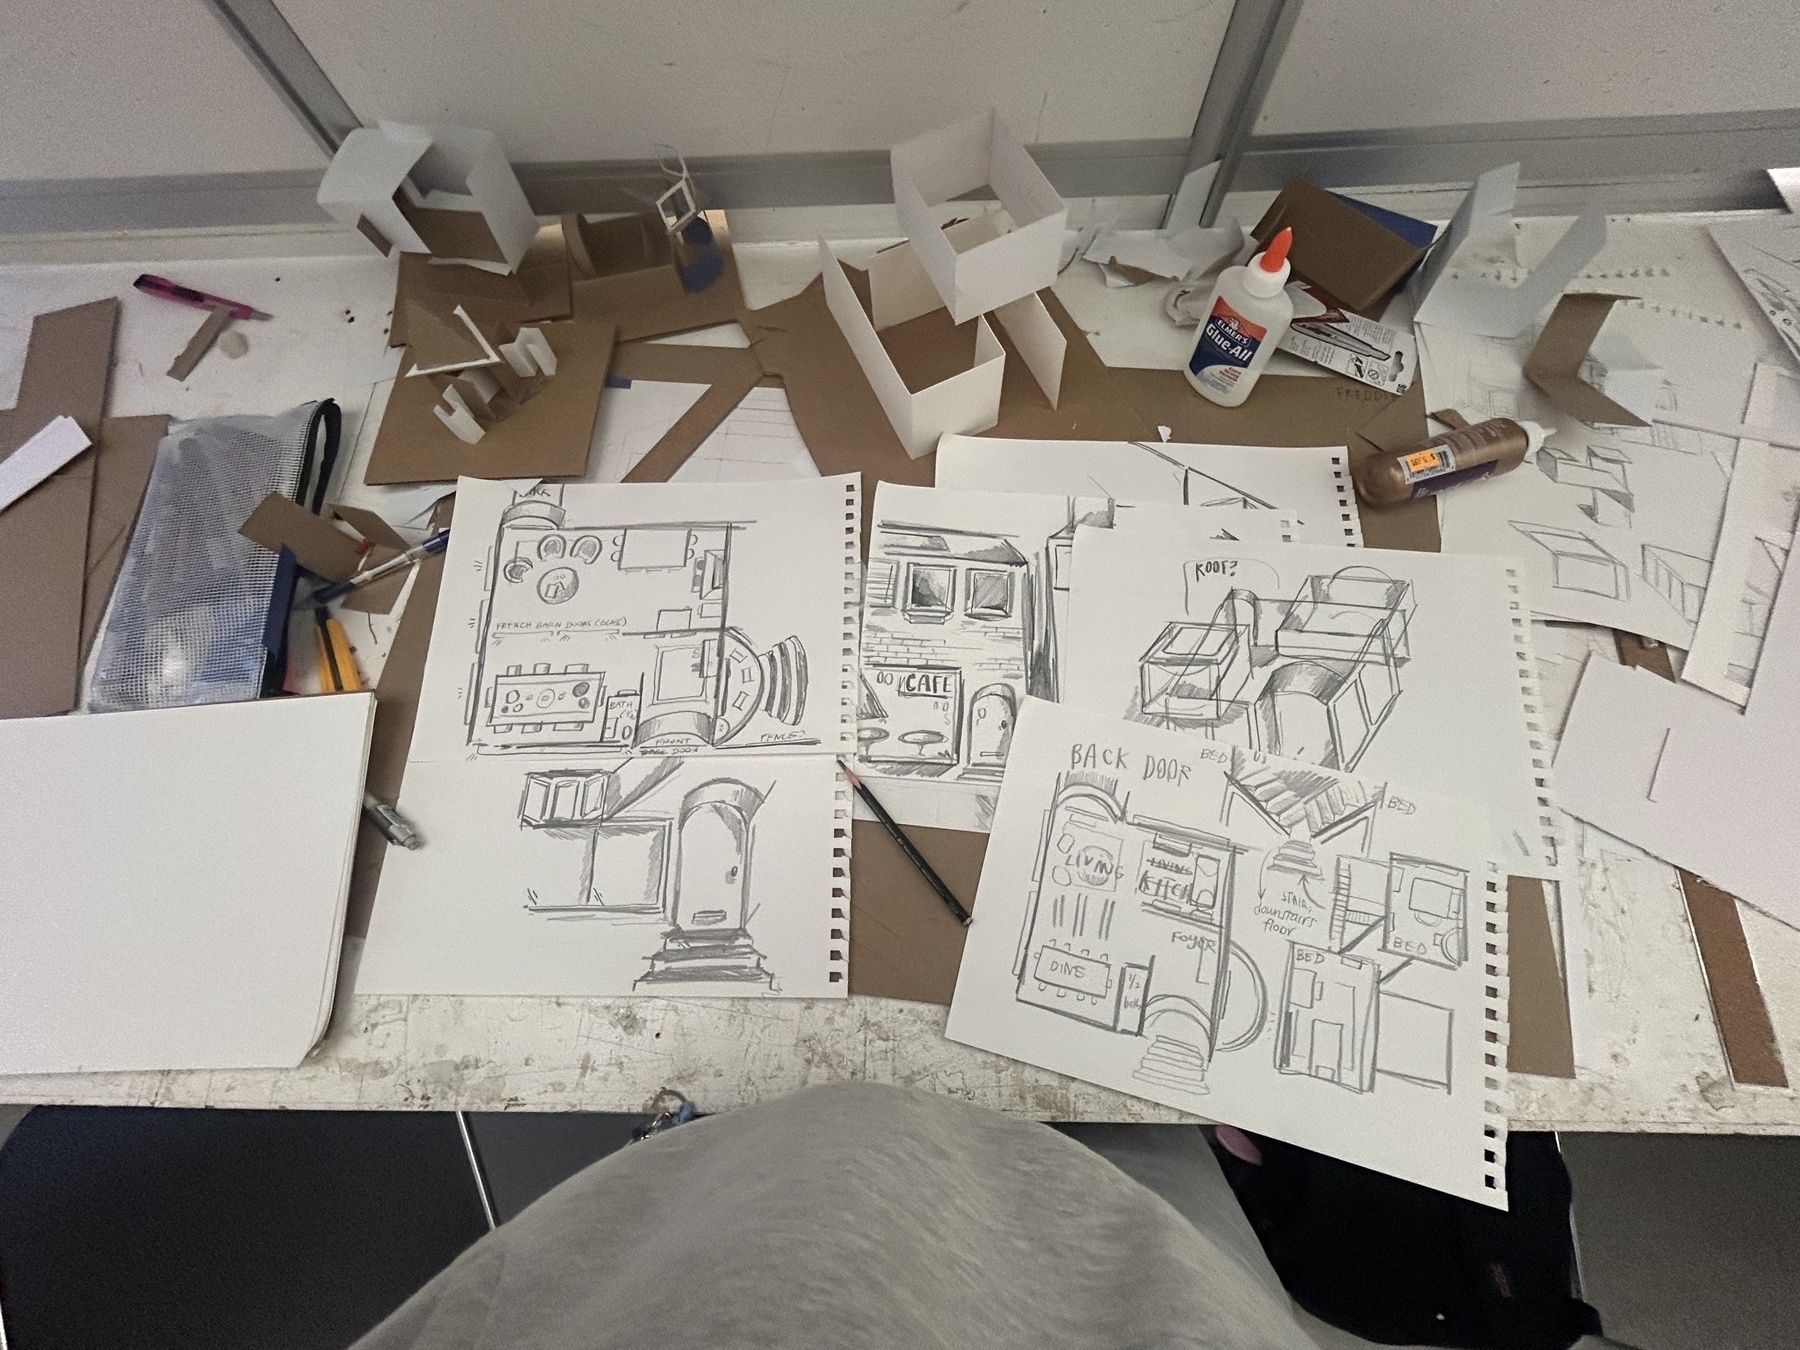 An aerial view of a studio desk has several black and white drawings of house plans and working paper models of buildings